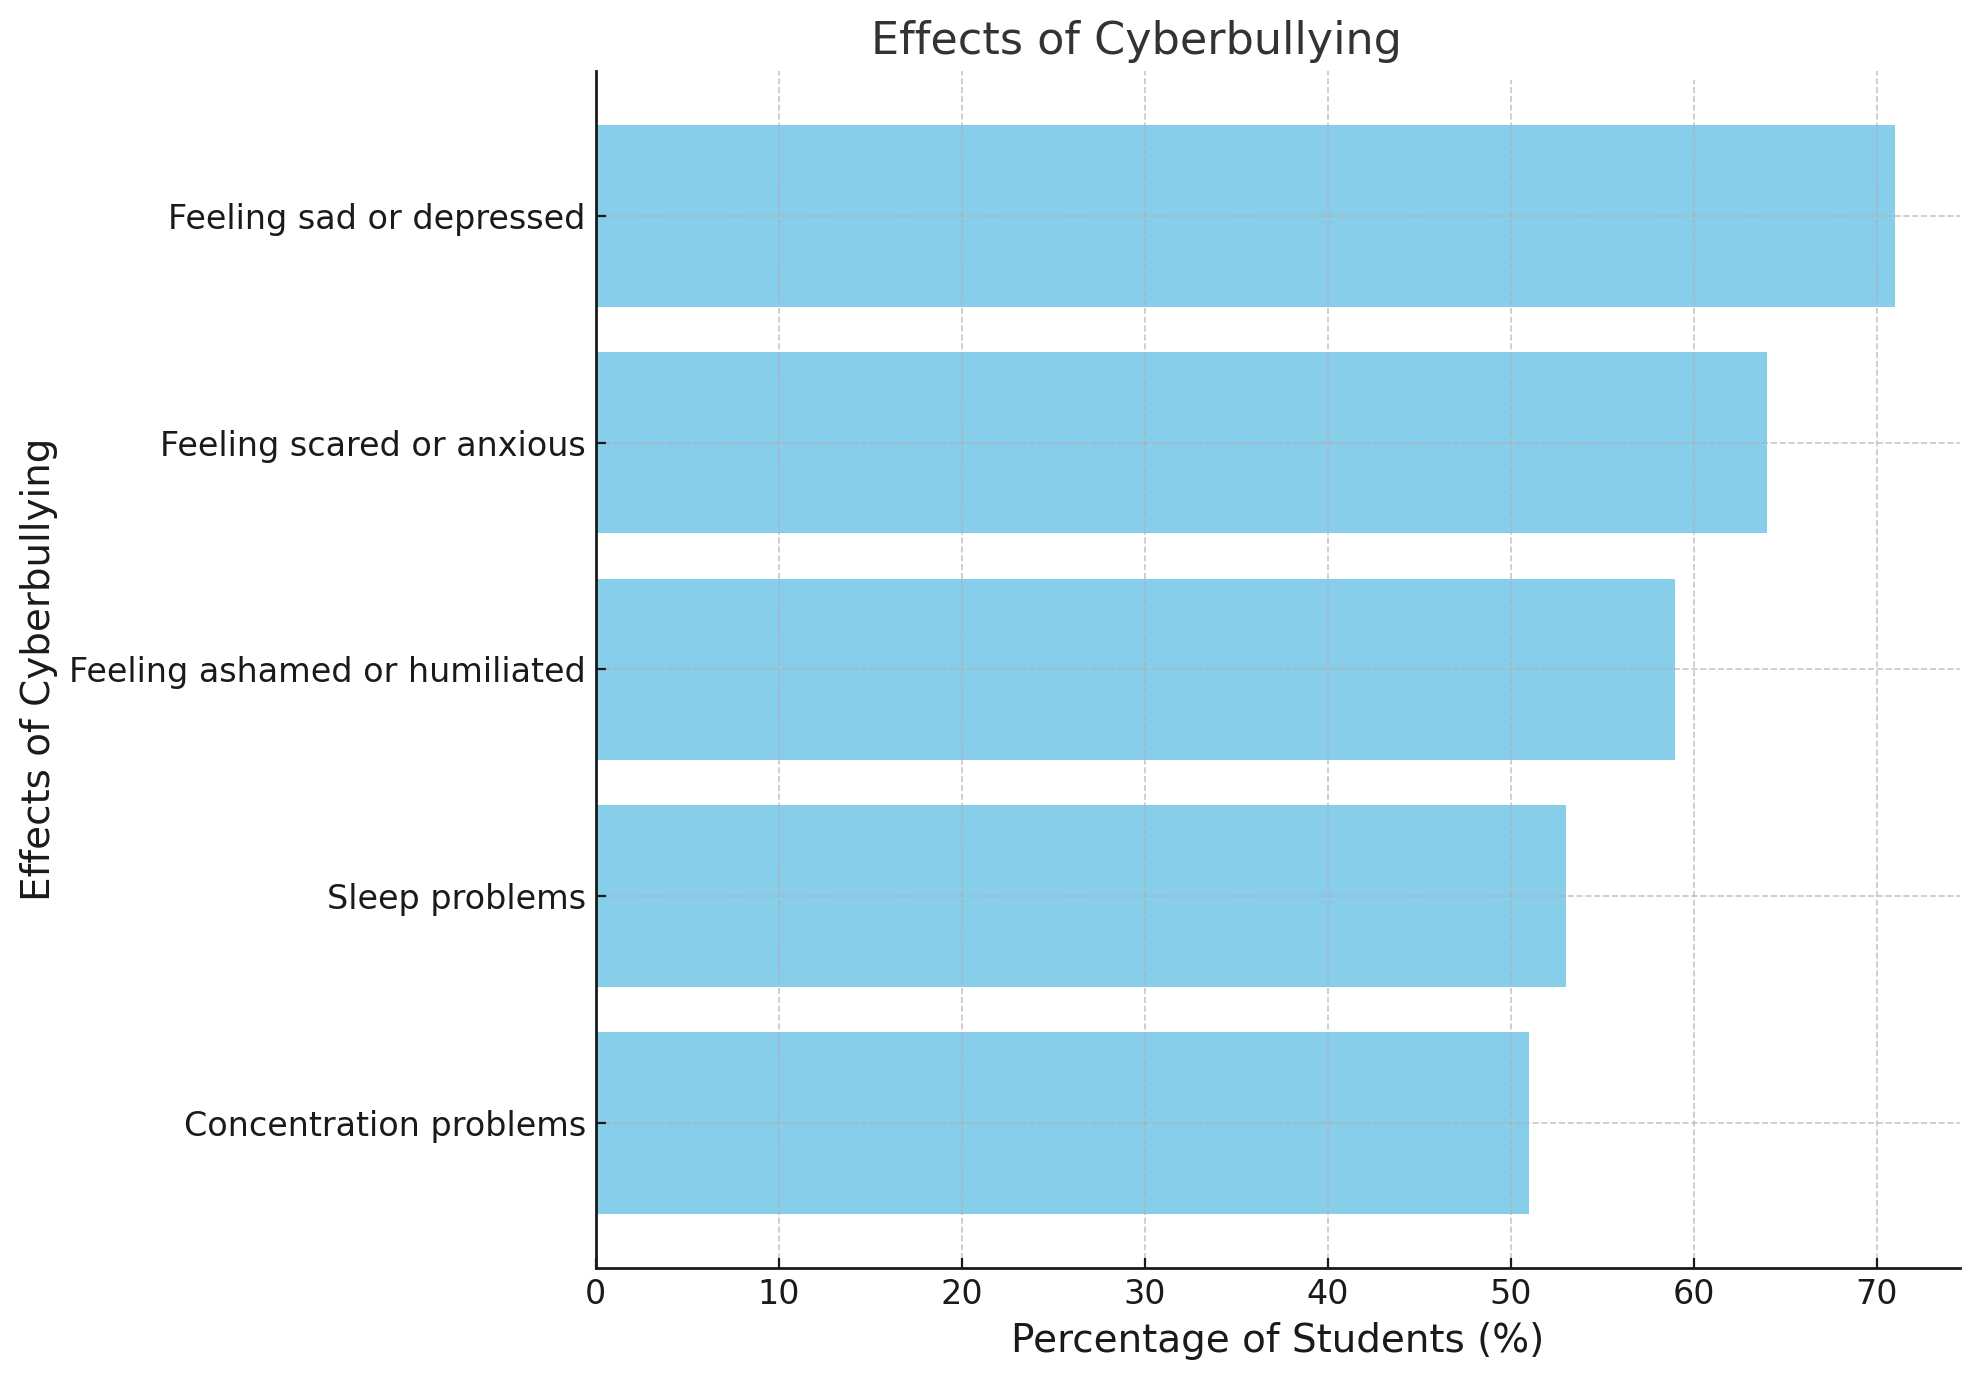 Horizontal bar chart illustrating the effects of cyberbullying on students